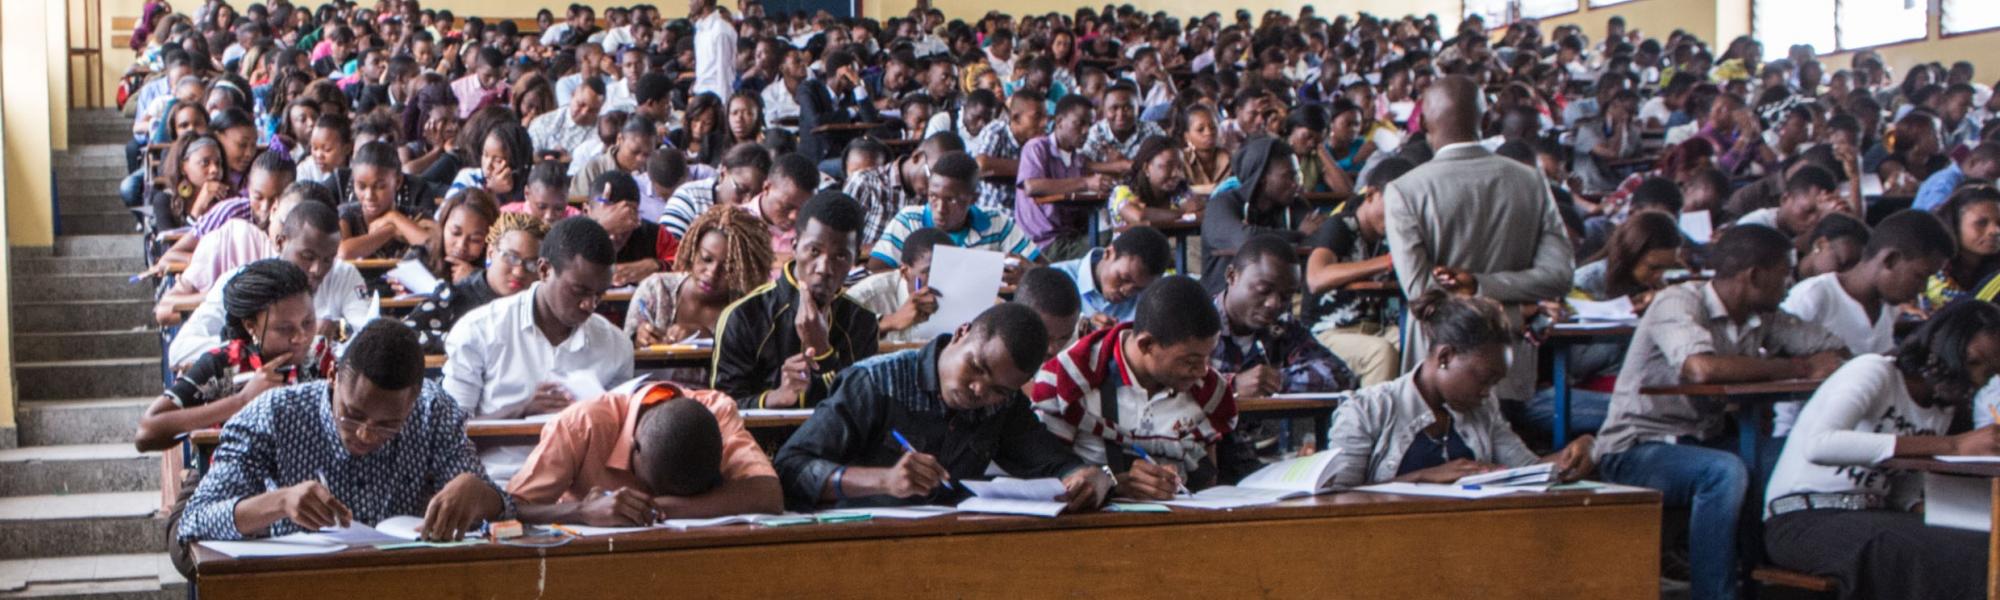 Students taking notes during class at the Congo Protestant University